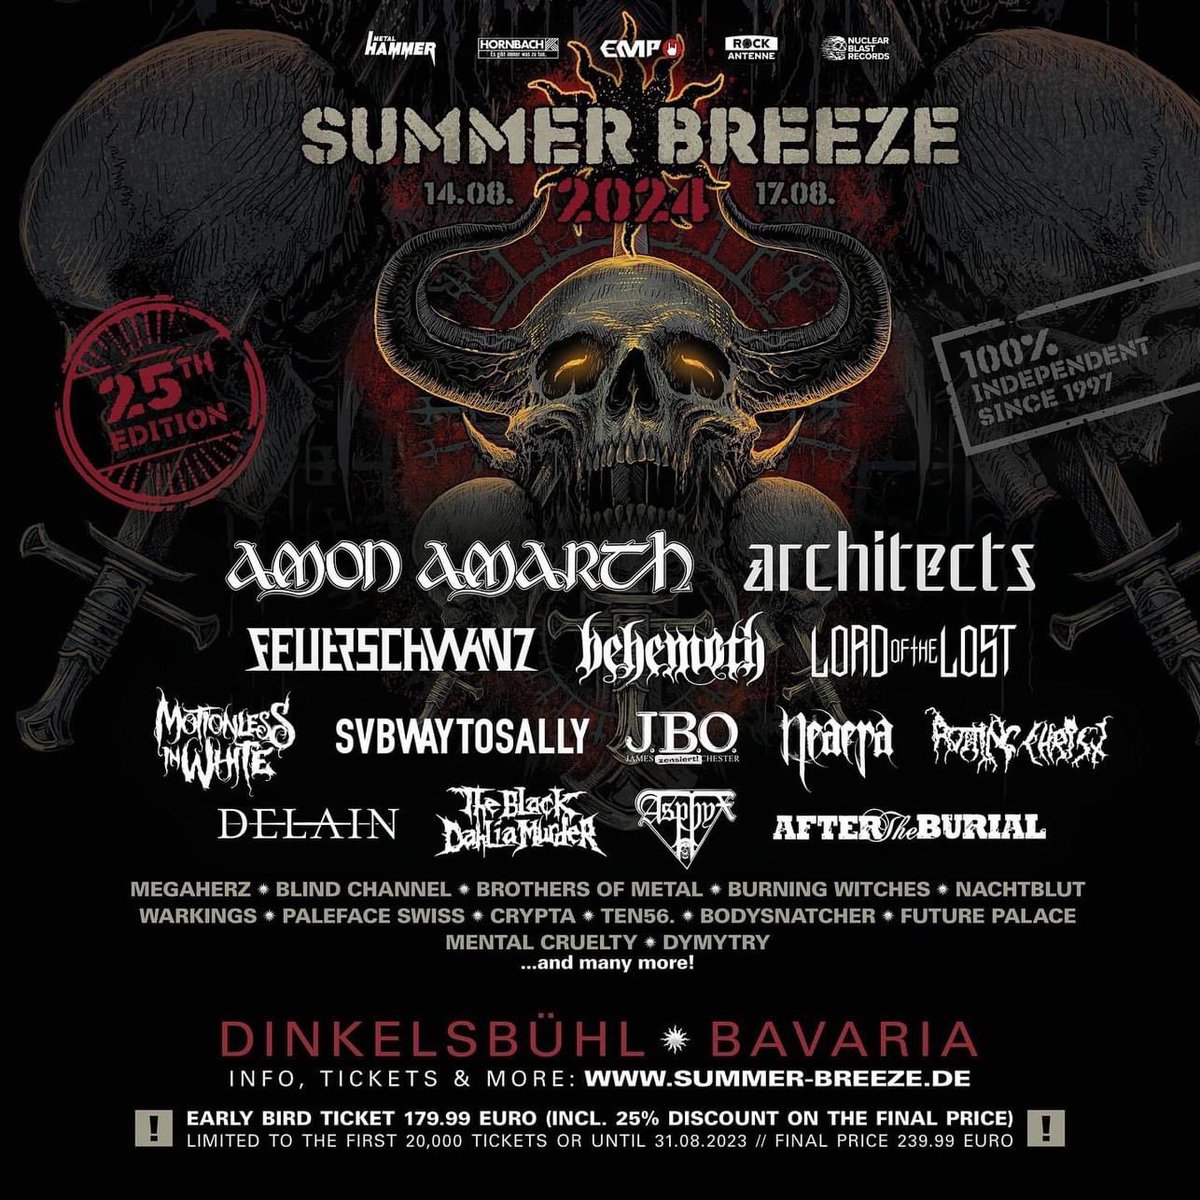 See you next year at @summerbreeze97